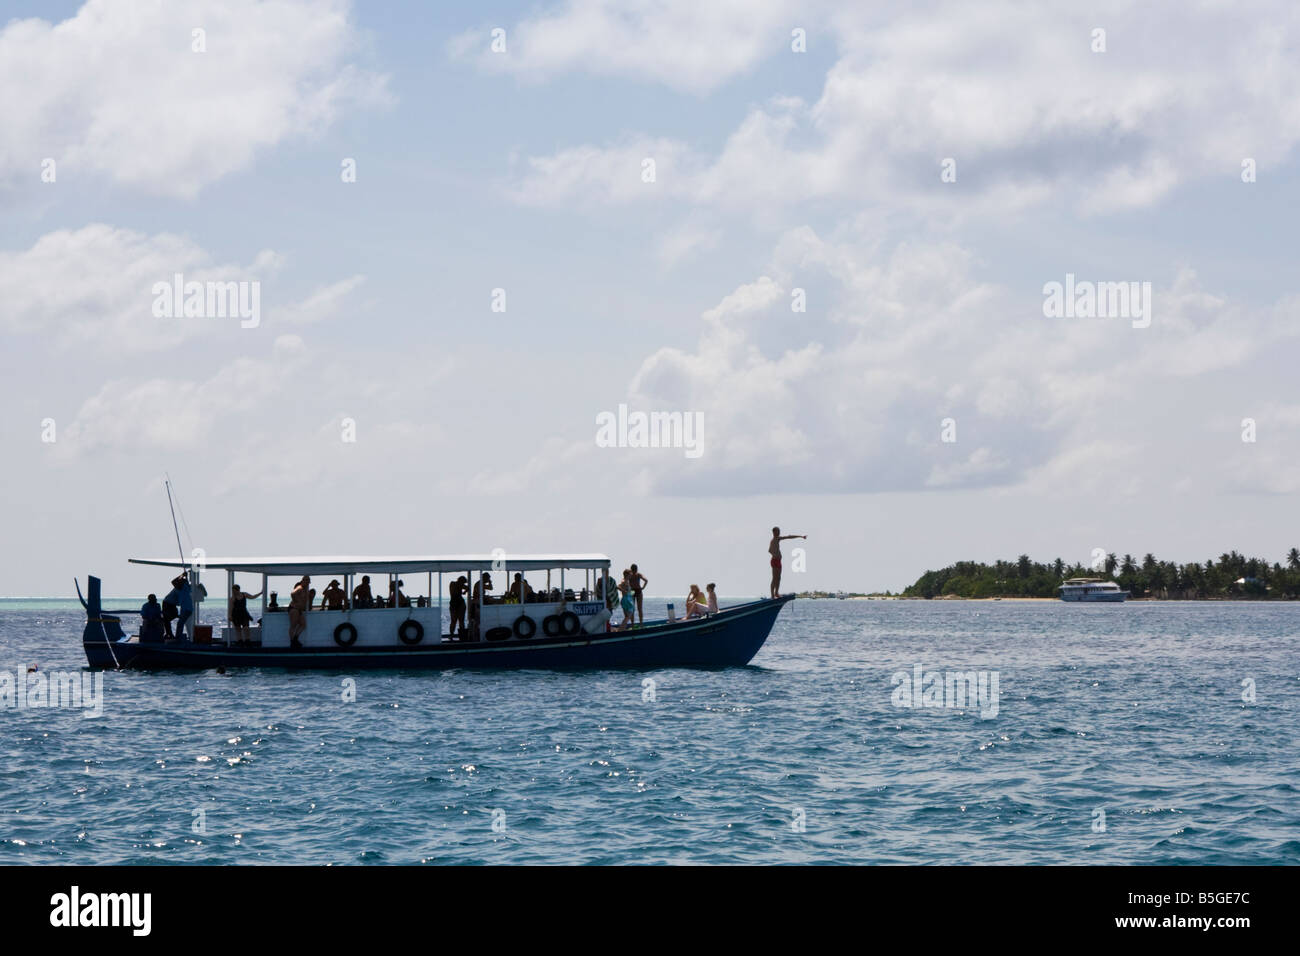 A boat full of tourists moving past an island in The Maldives Stock Photo